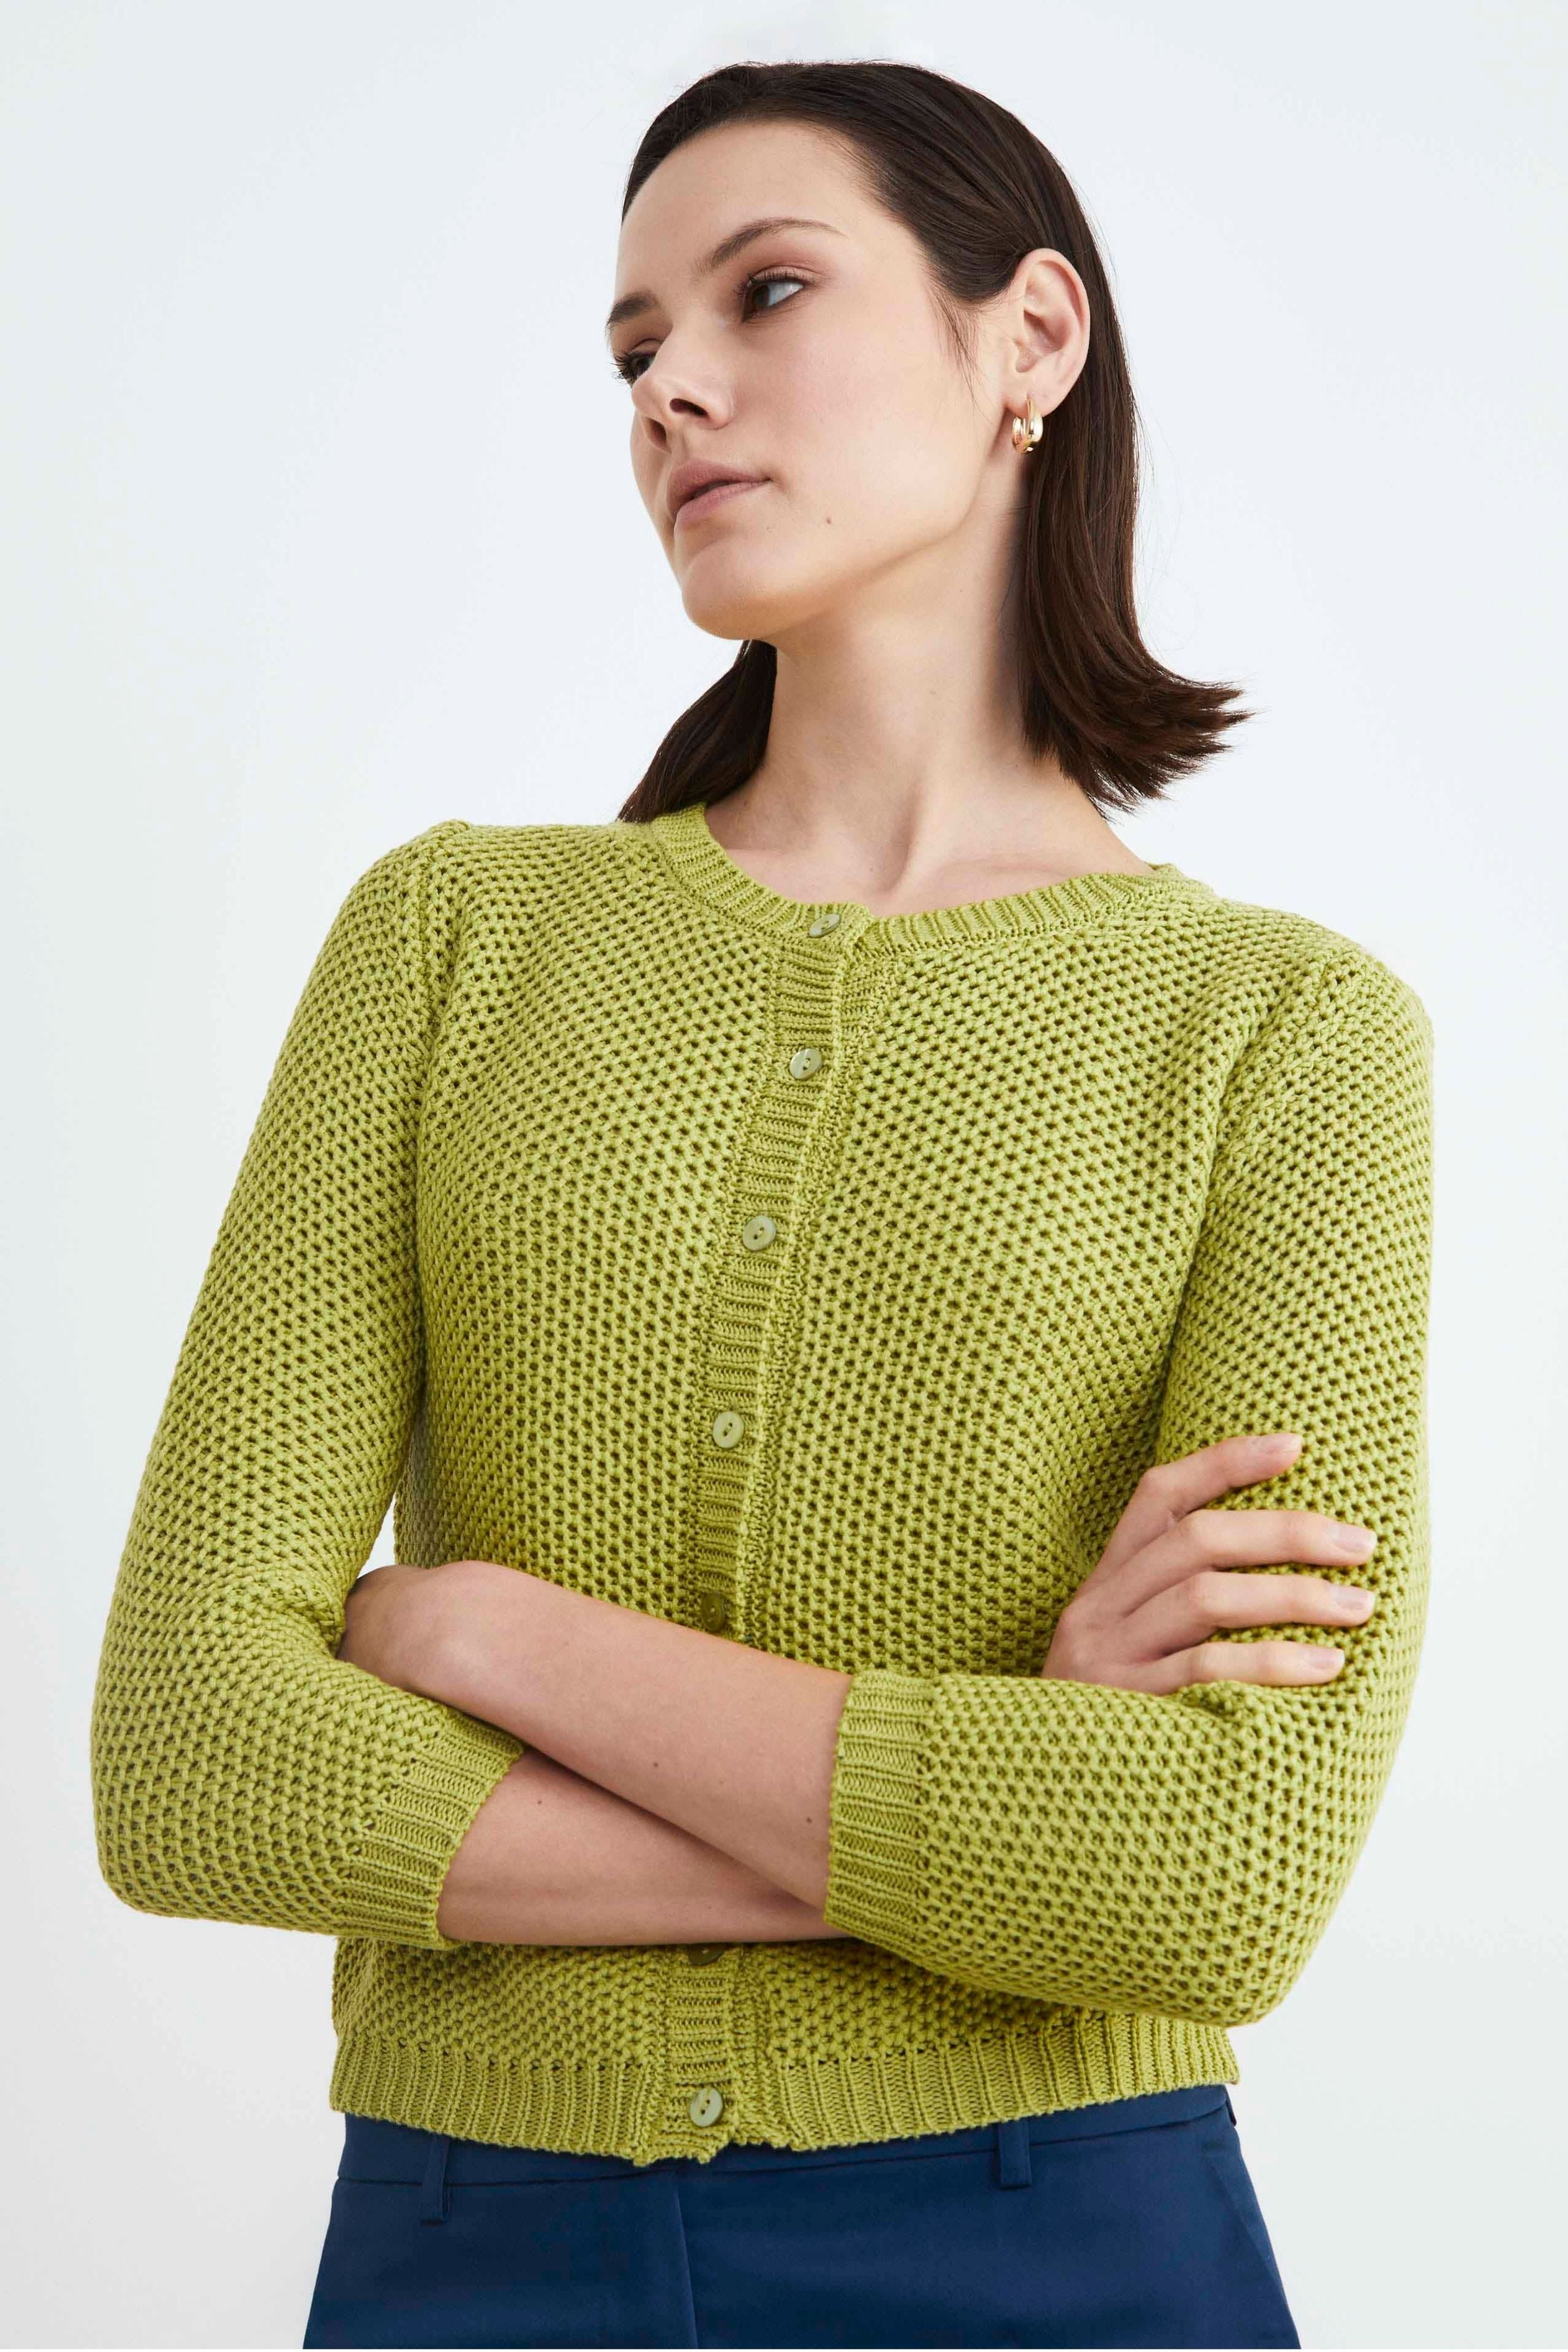 Women’s perforated cardigan - GREEN